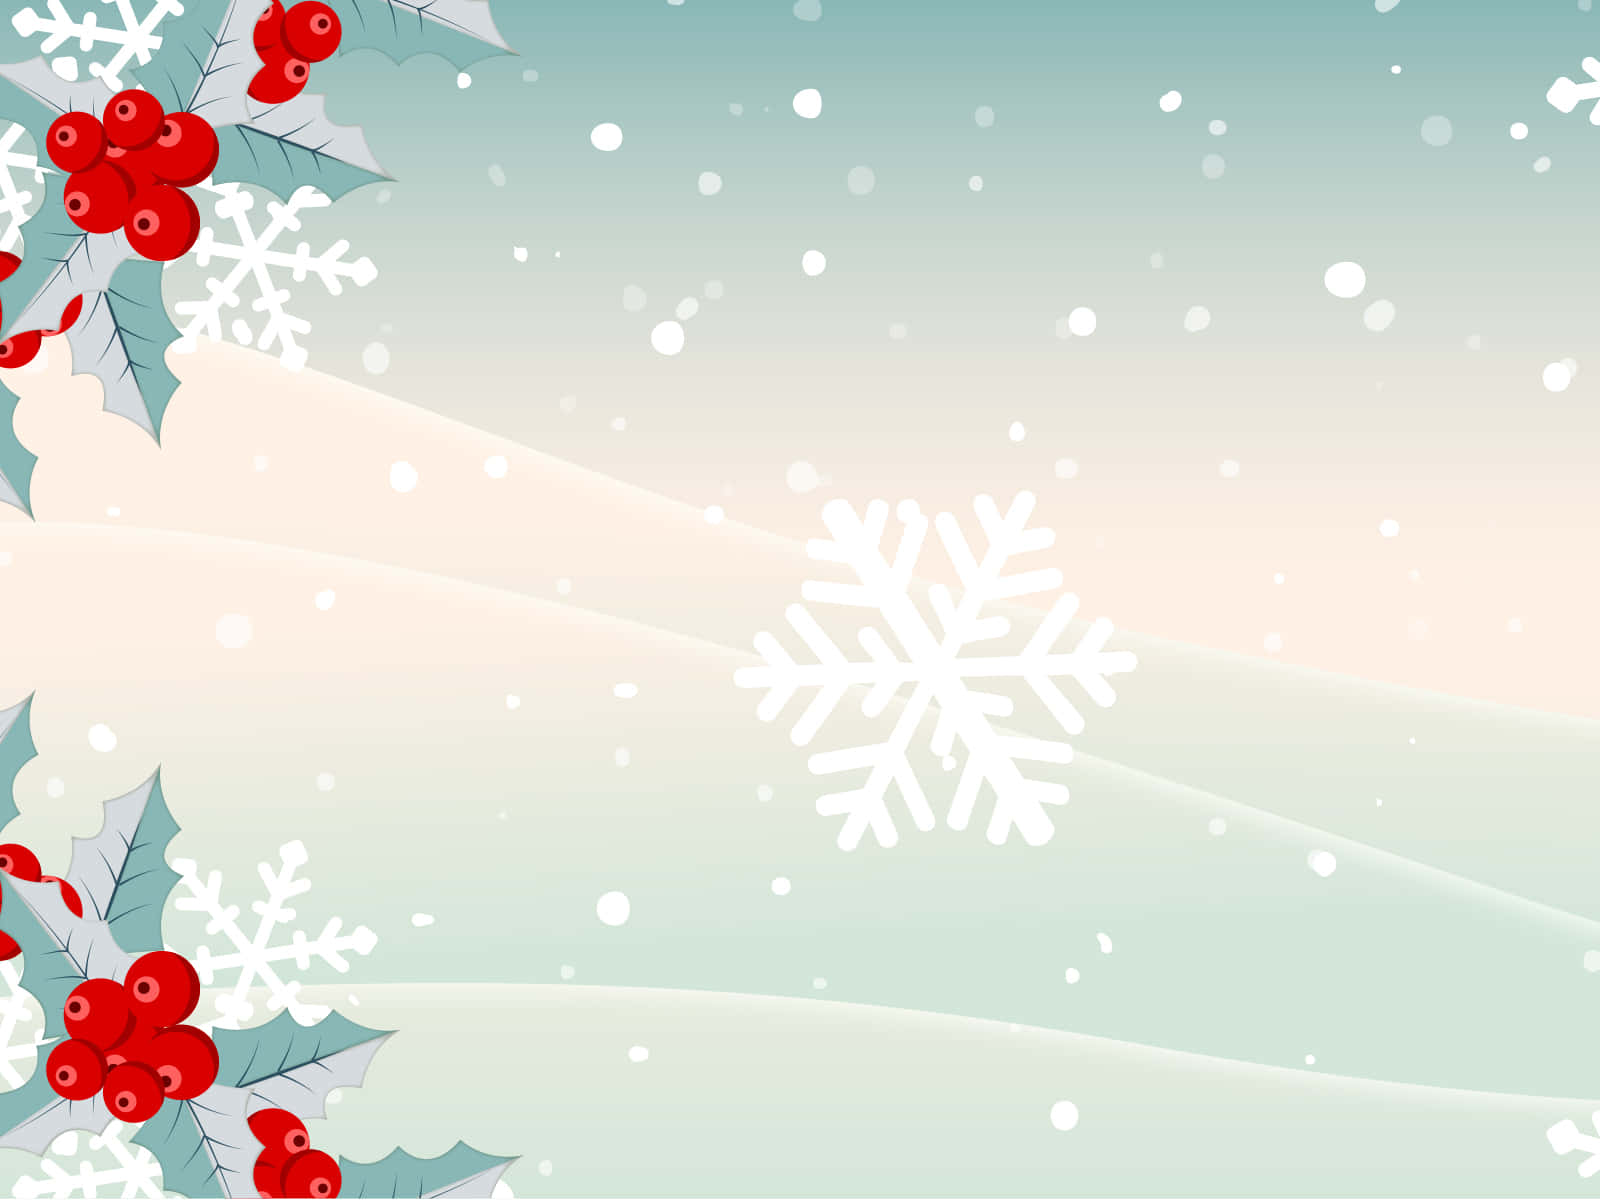 A Christmas Background With Snowflakes And Holly